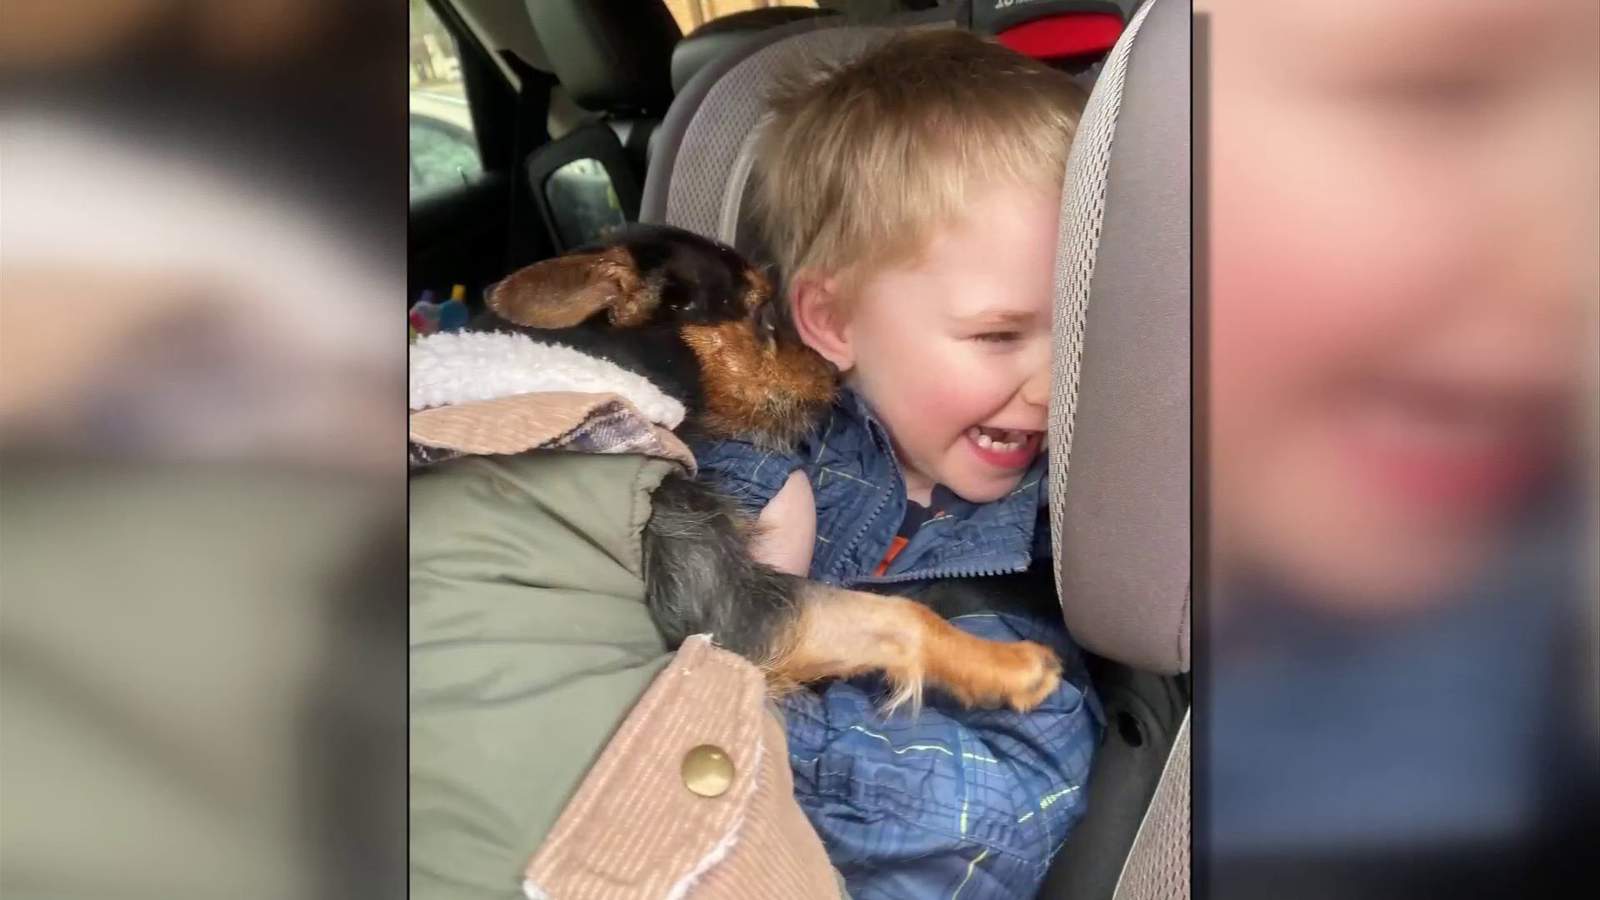 Franklin County family credits kindness of strangers for saving their dog